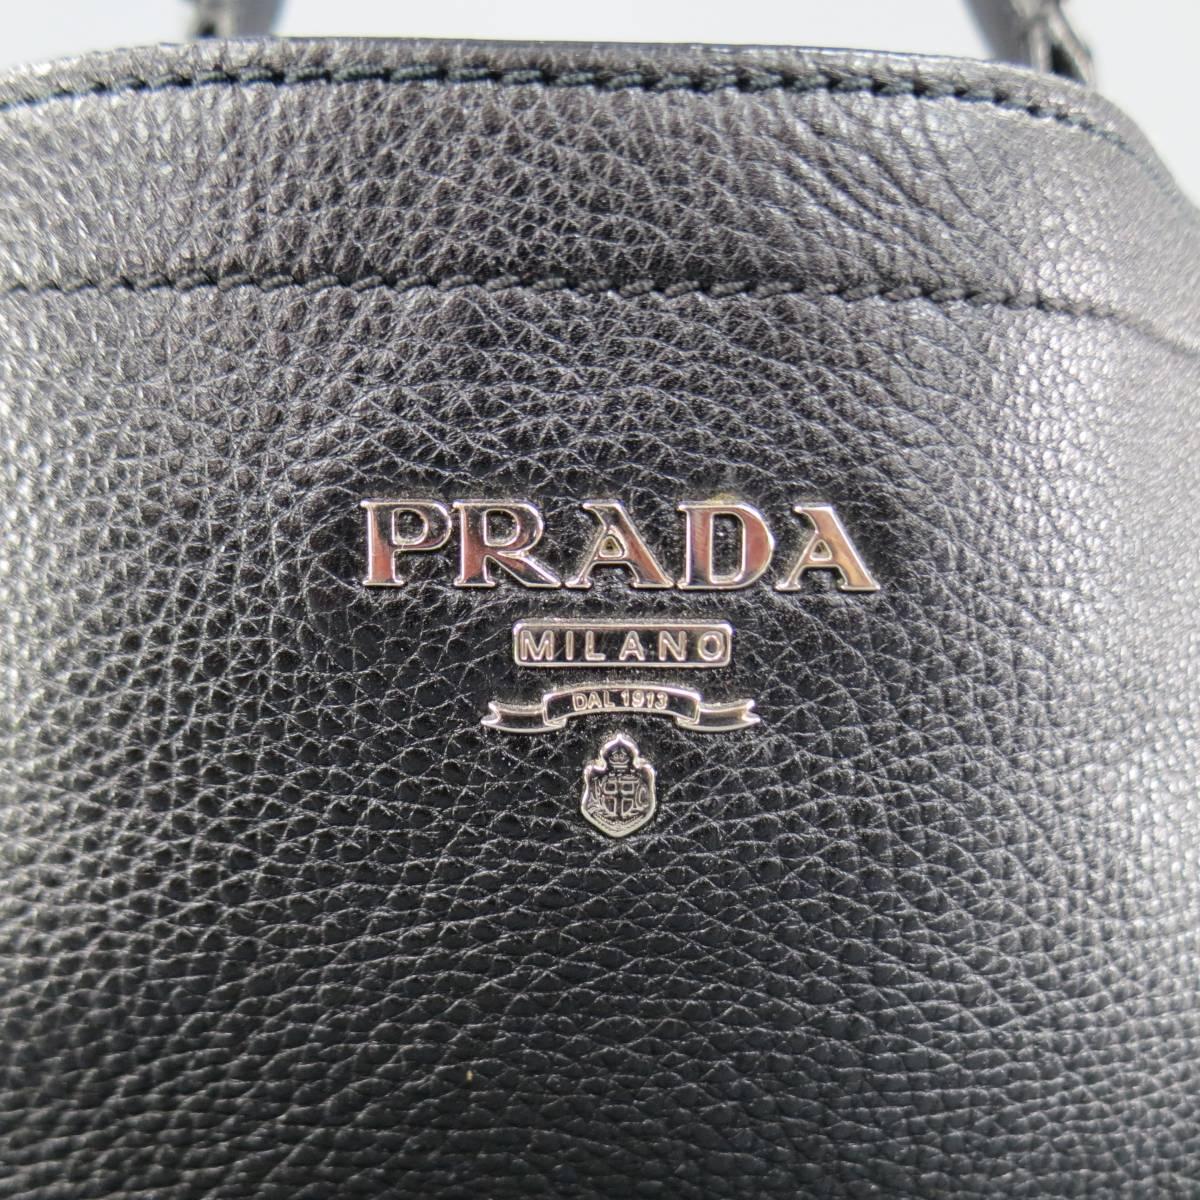 Classic PRADA shoulder bag in black pebbled leather featuring symmetrical side pockets, frontal silver tone metal logo plaque, snap closure, and adjustable shoulder strap with hoops. Made in Italy.
 
Excellent Pre-Owned Condition.
